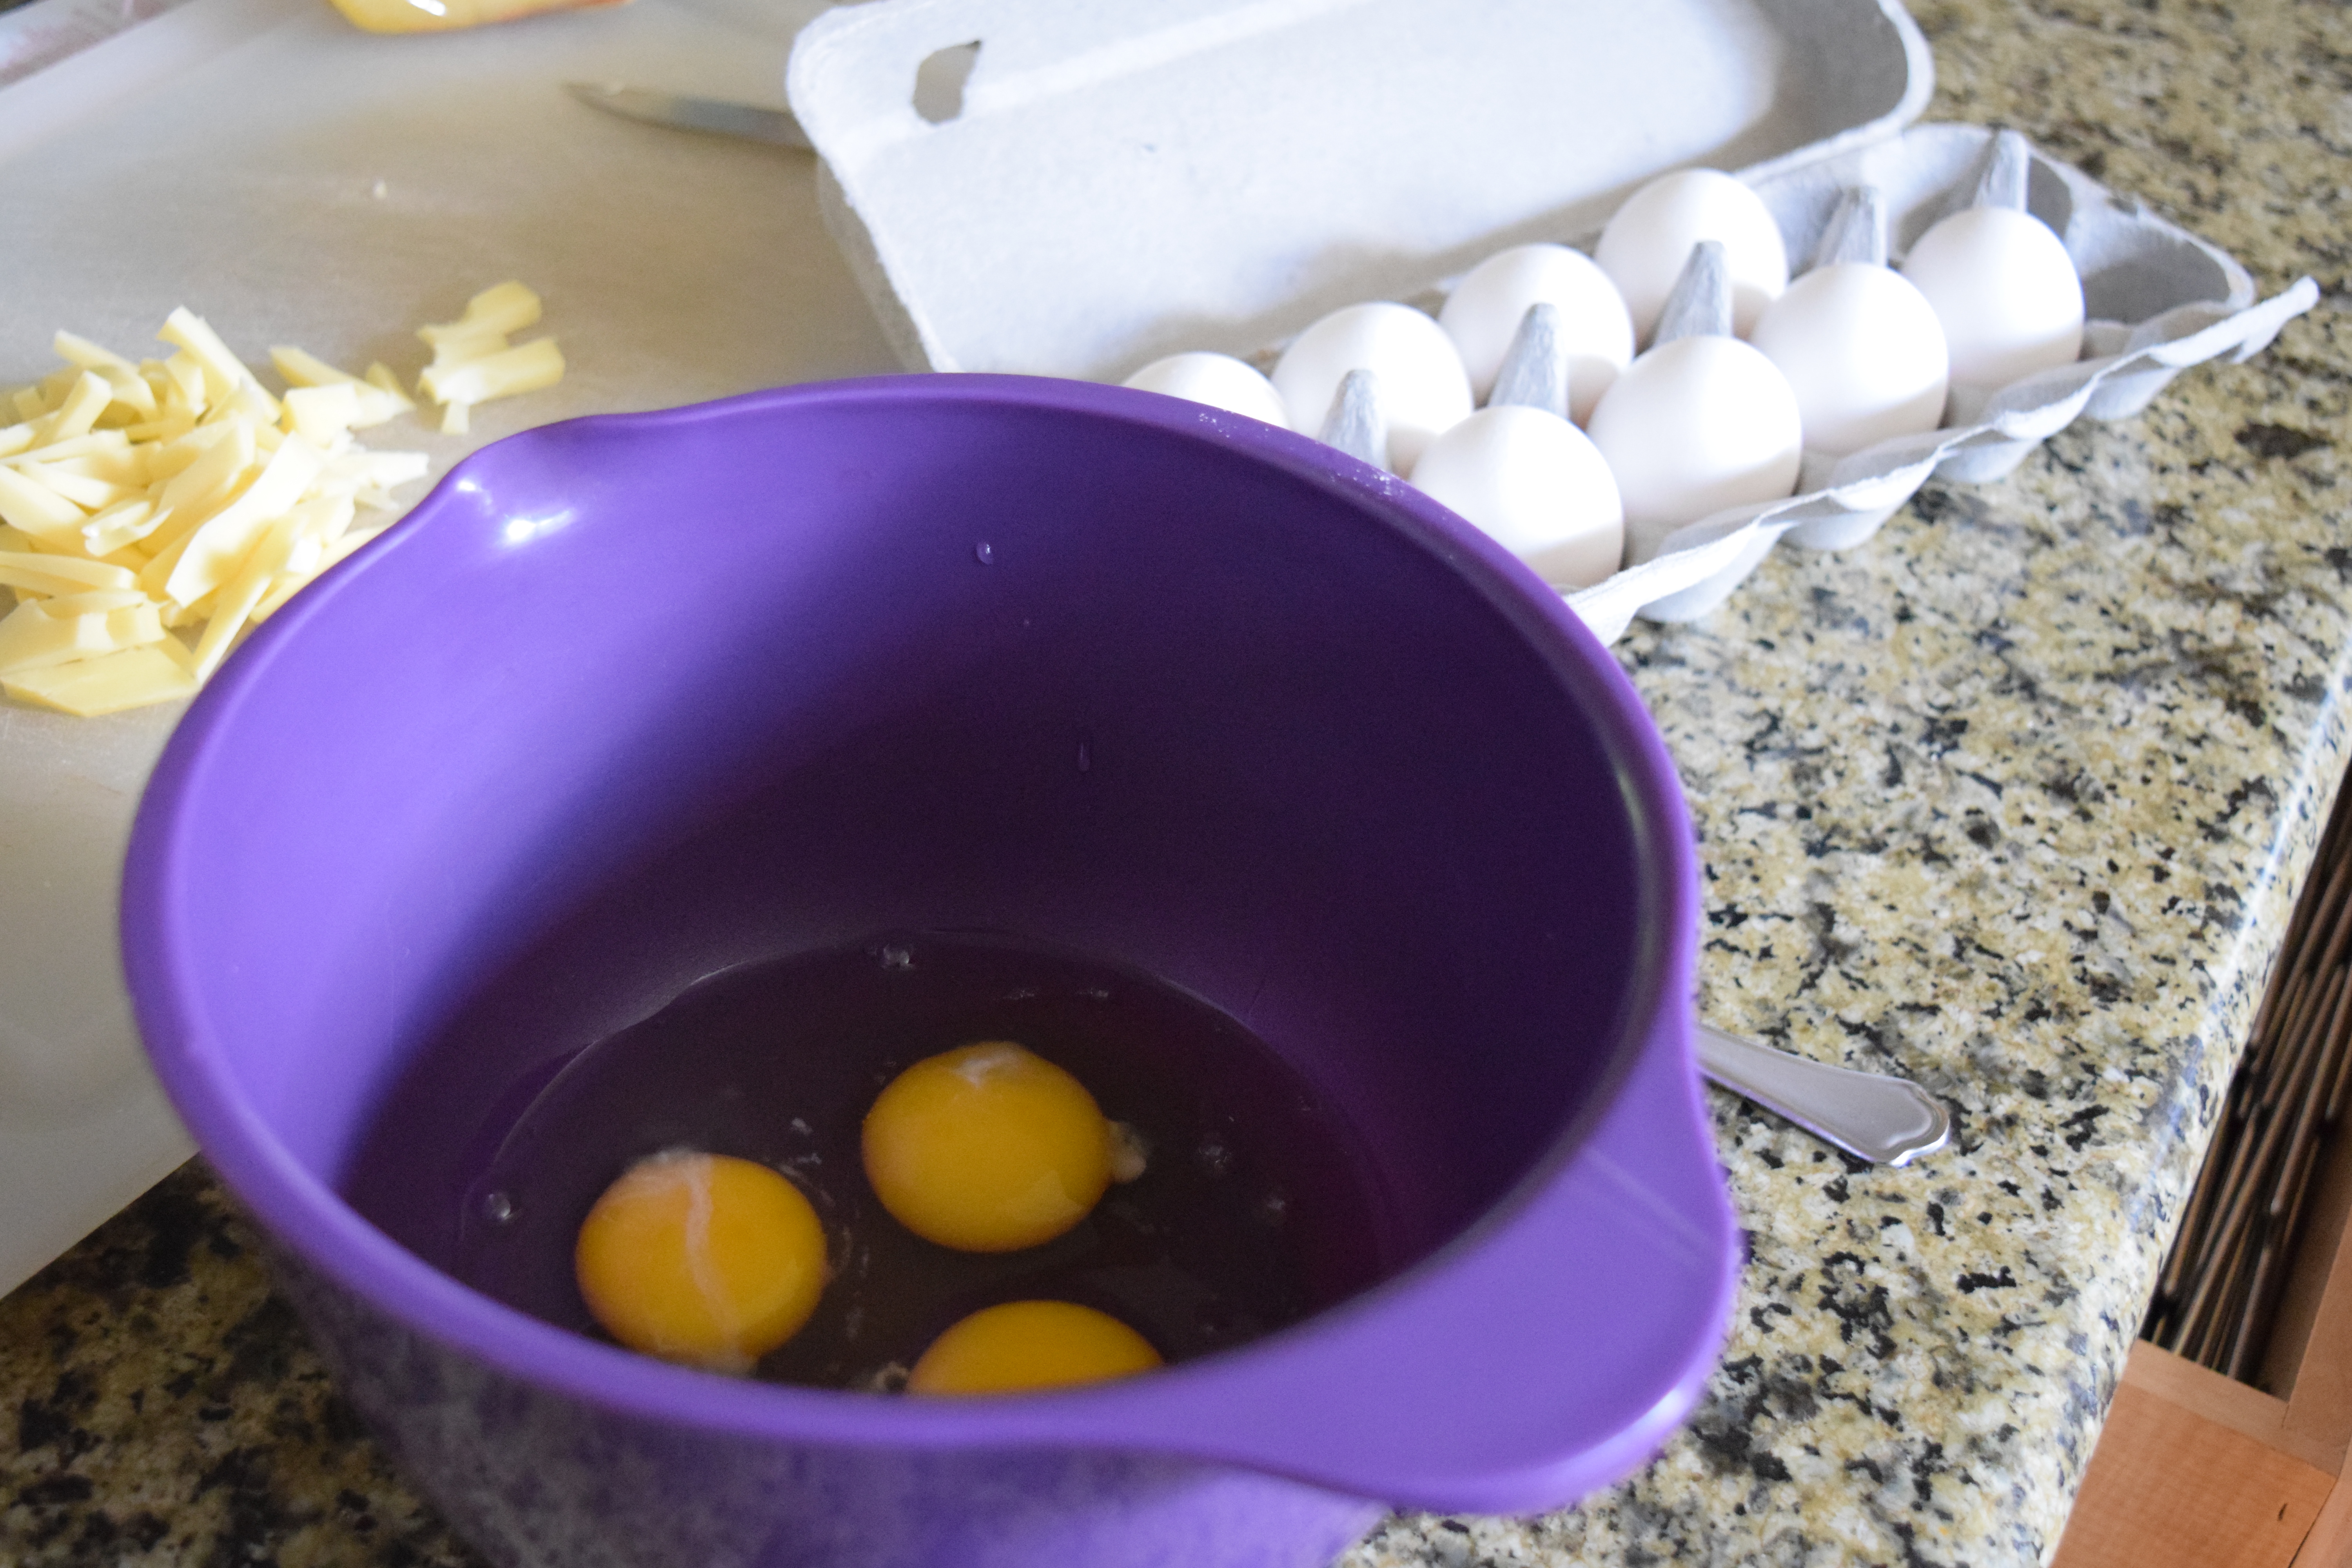 Eggs cracked in mixing bowl